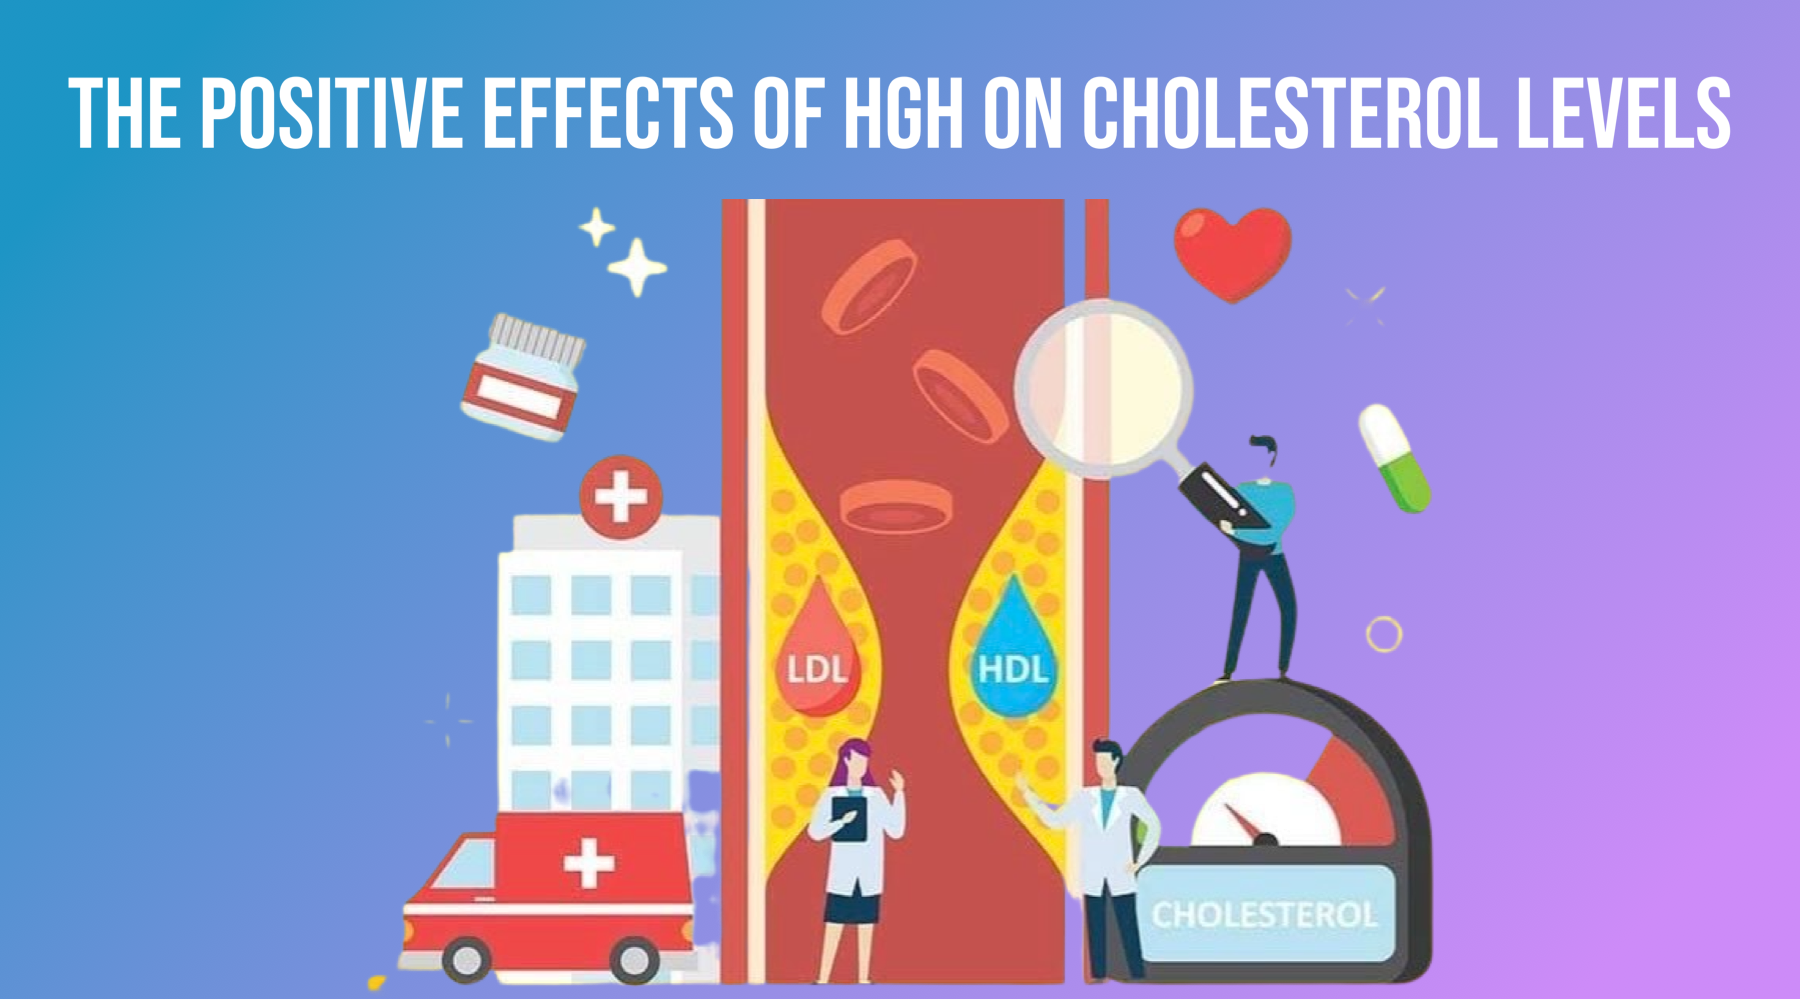 The Positive Effects of HGH on Cholesterol Levels